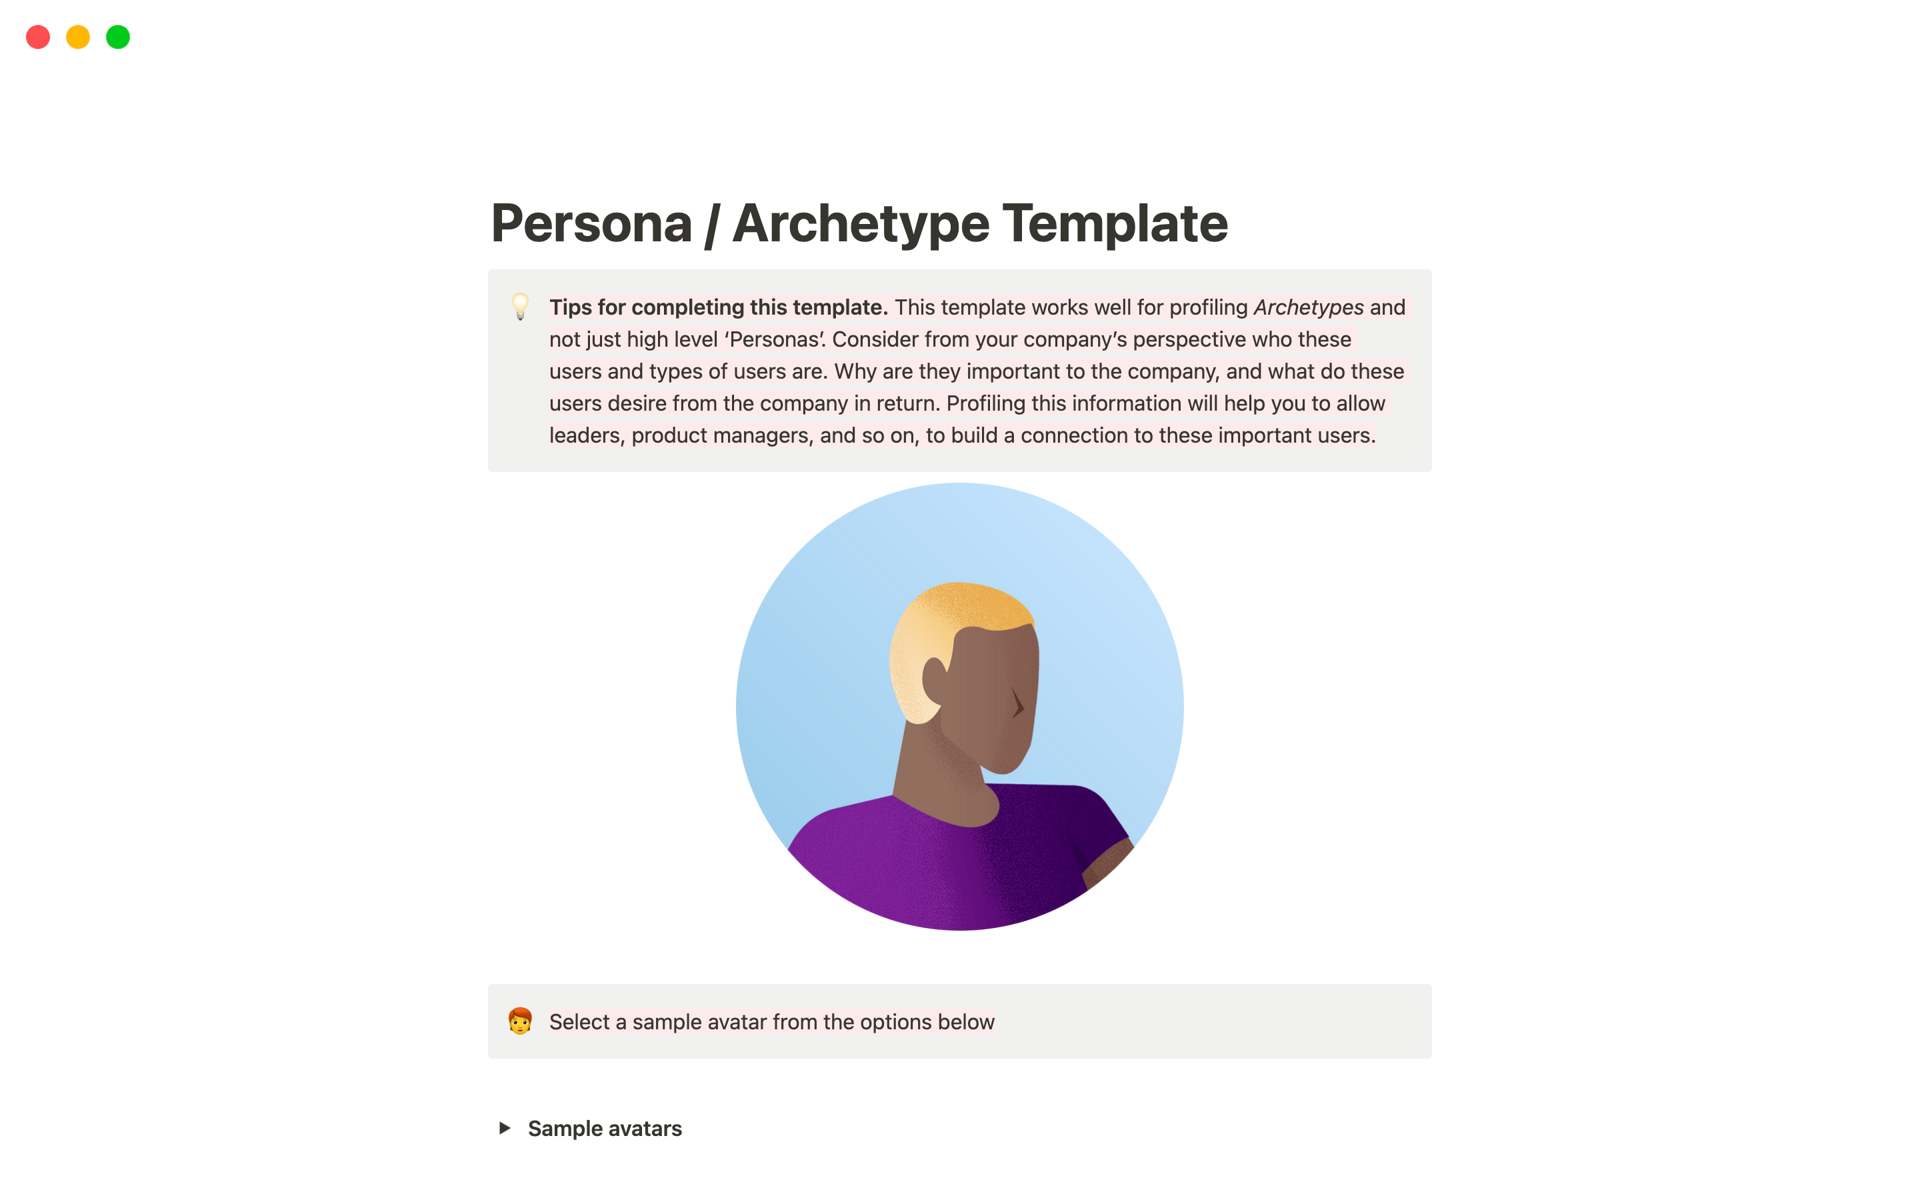 A flexible template capable of profiling a Persona, or can flex and capture more details to profile an Archetype.